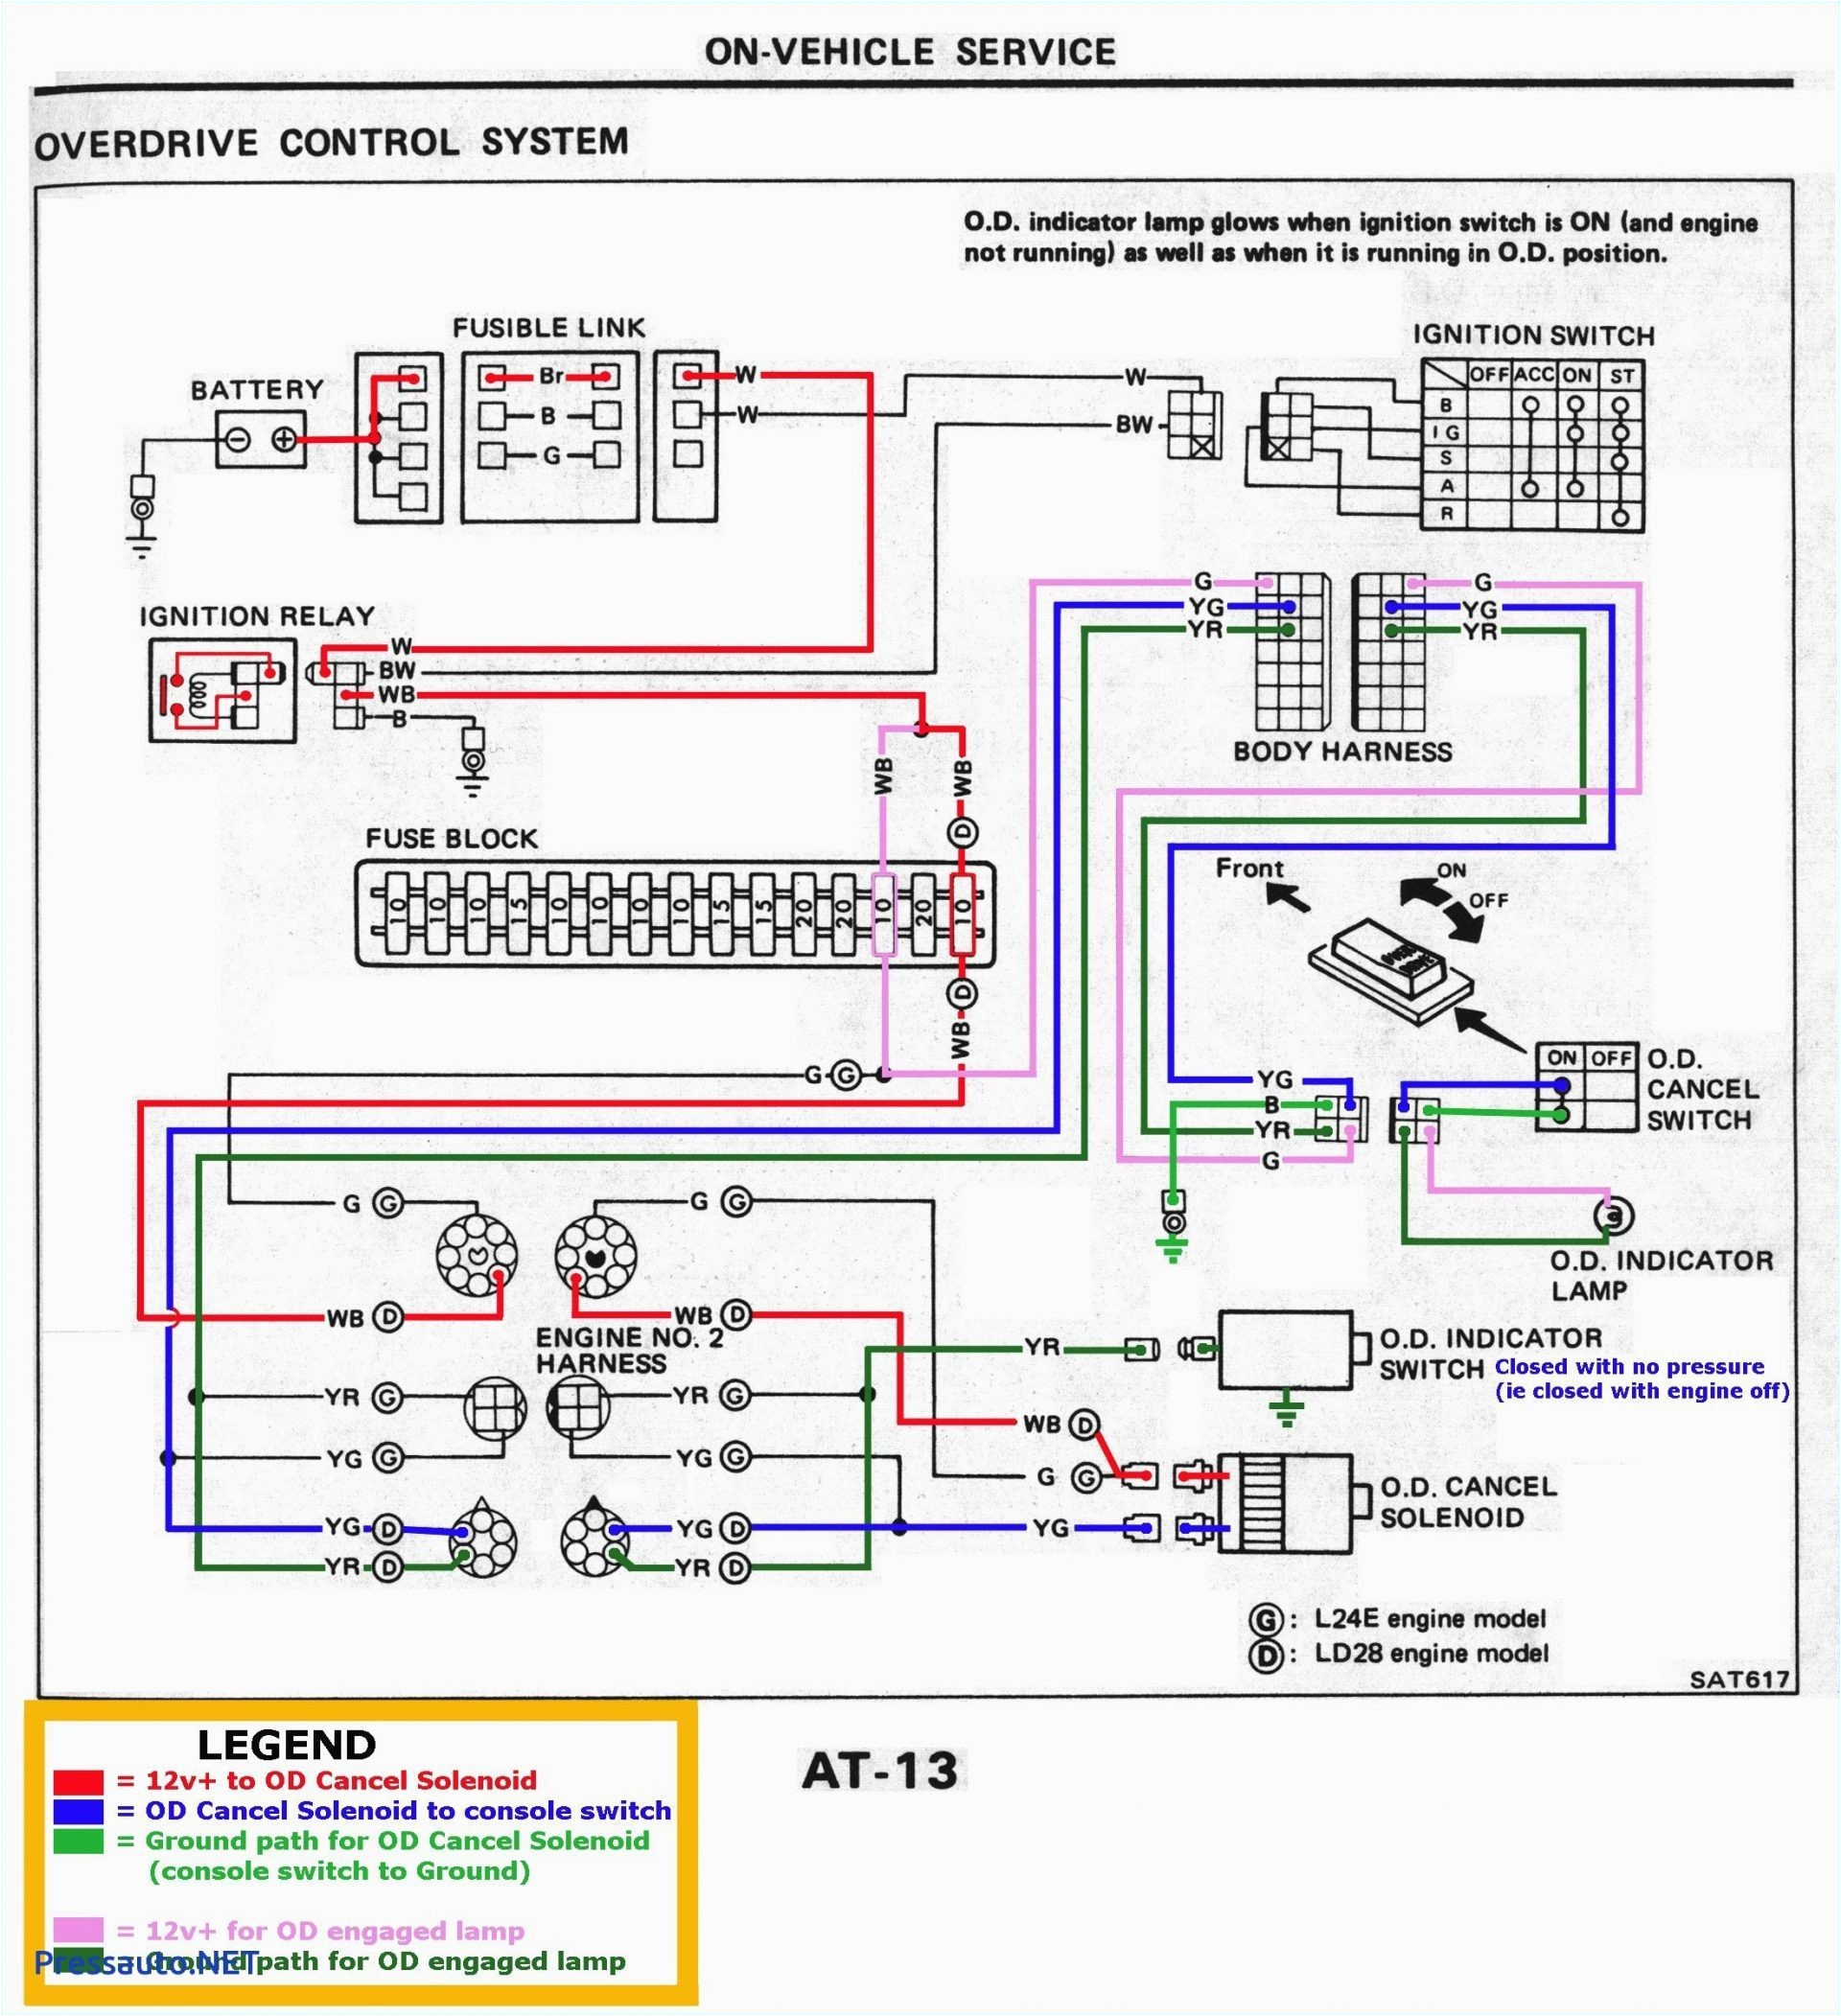 pictures gallery of wiring diagram for 240 volt plug luxury 20 amp plug wiring diagram best mis wiring a 120 volt rv outlet